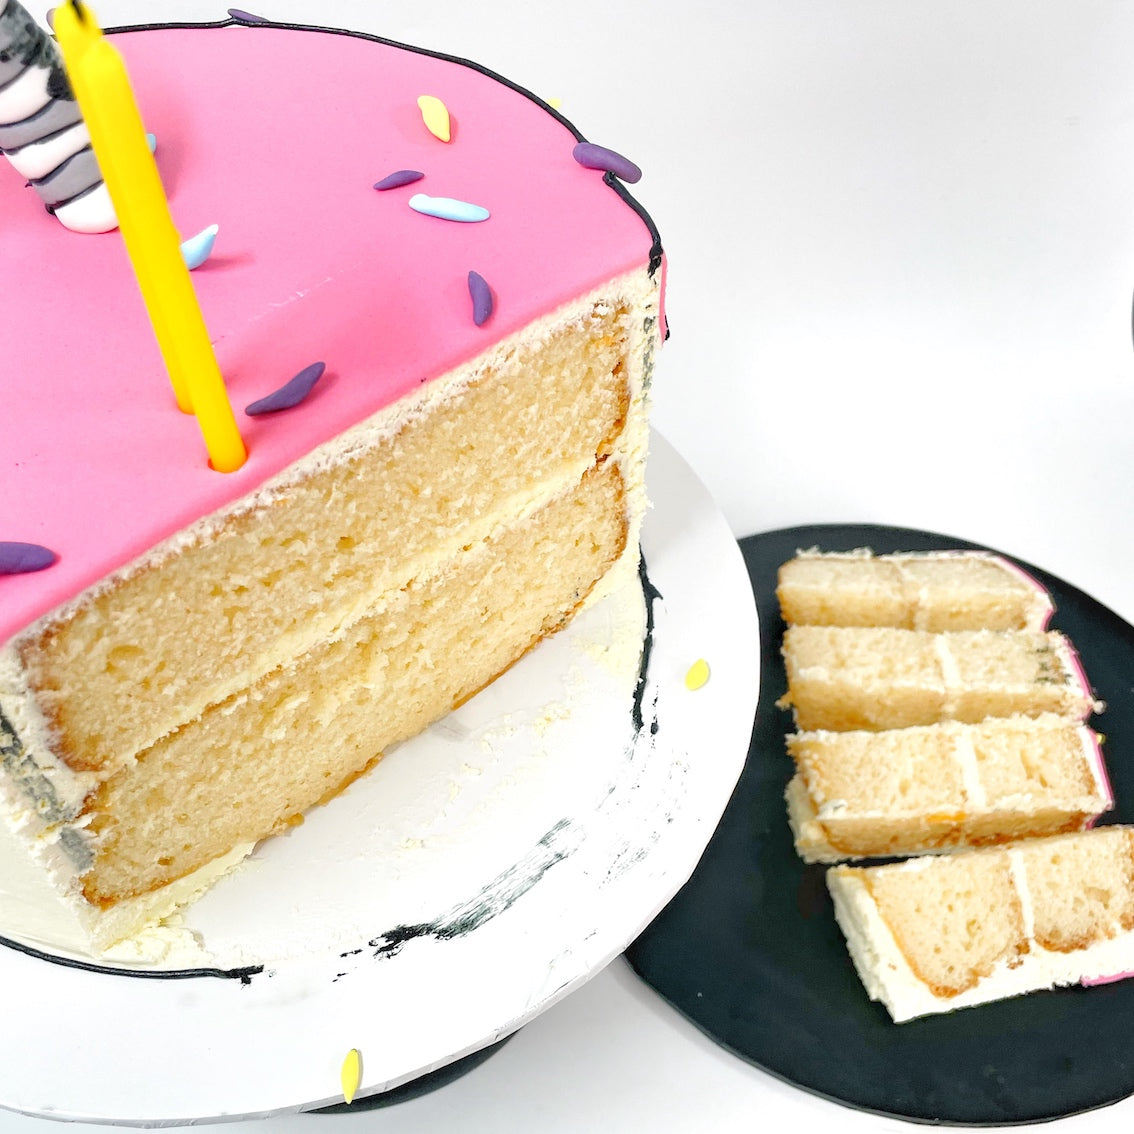 Who should get the first slice of birthday cake? - Quora